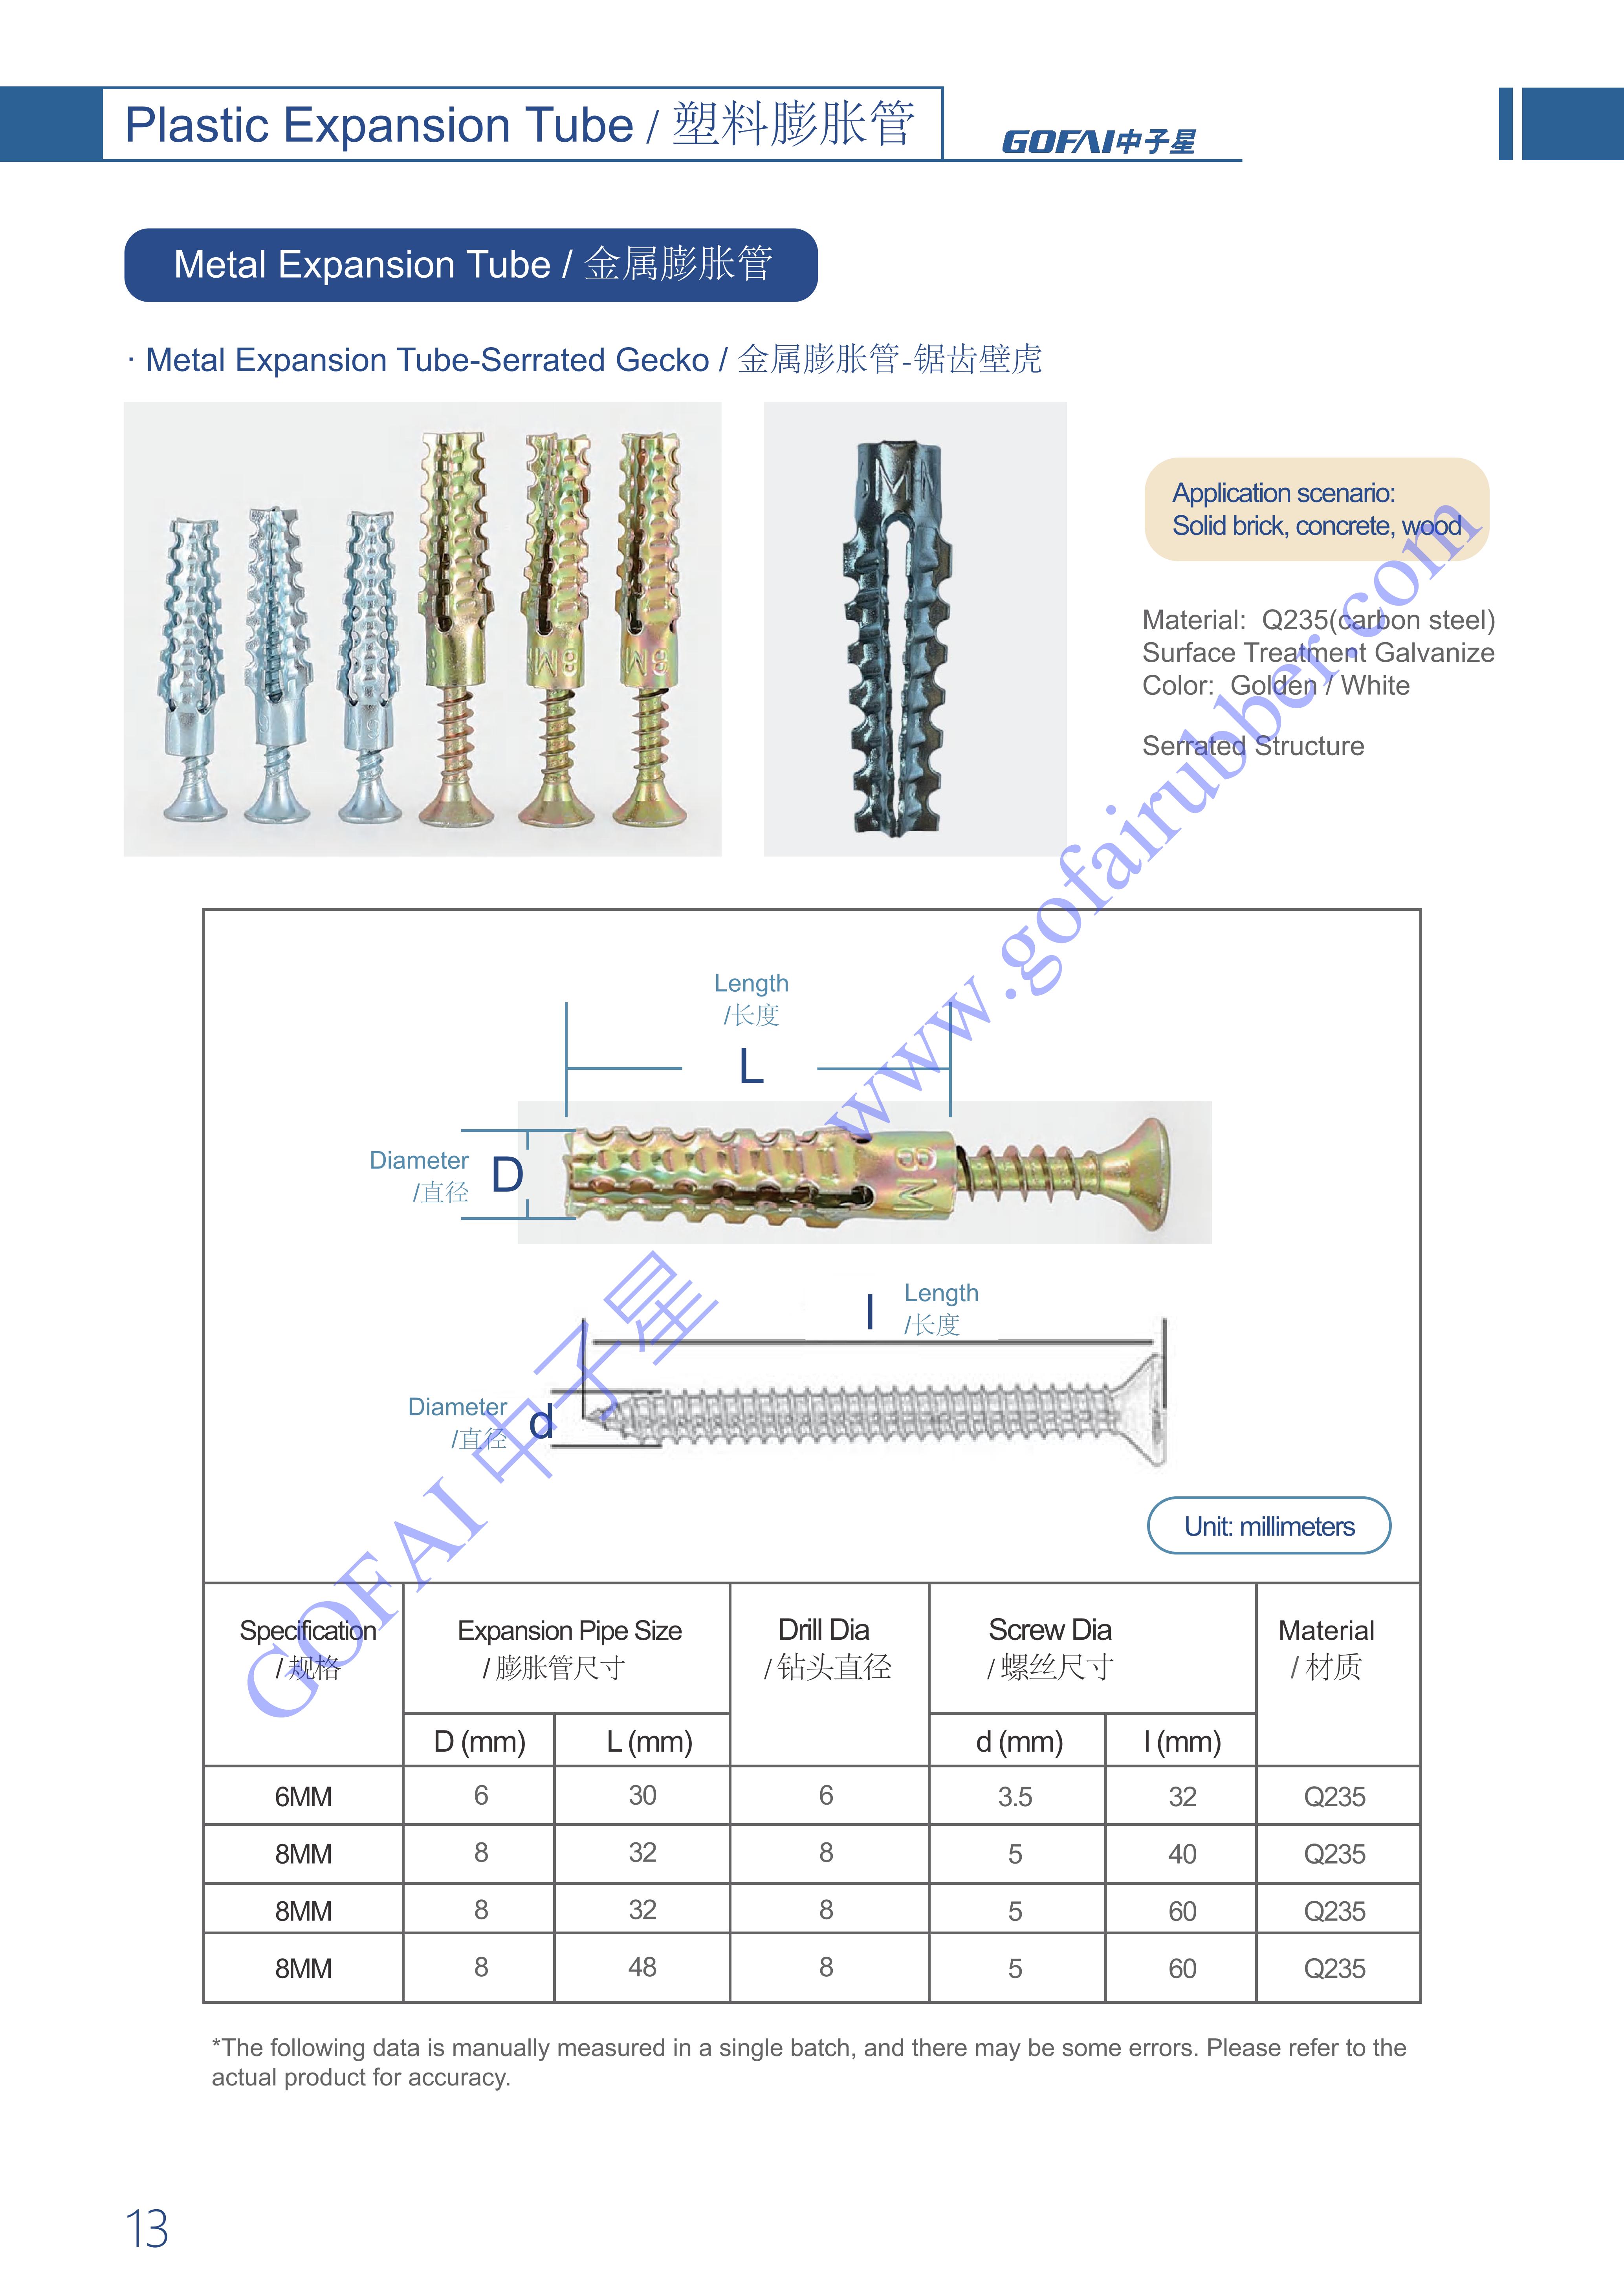 GOFAI Plastic Expansion Tube Series Products Brochure_14.jpg